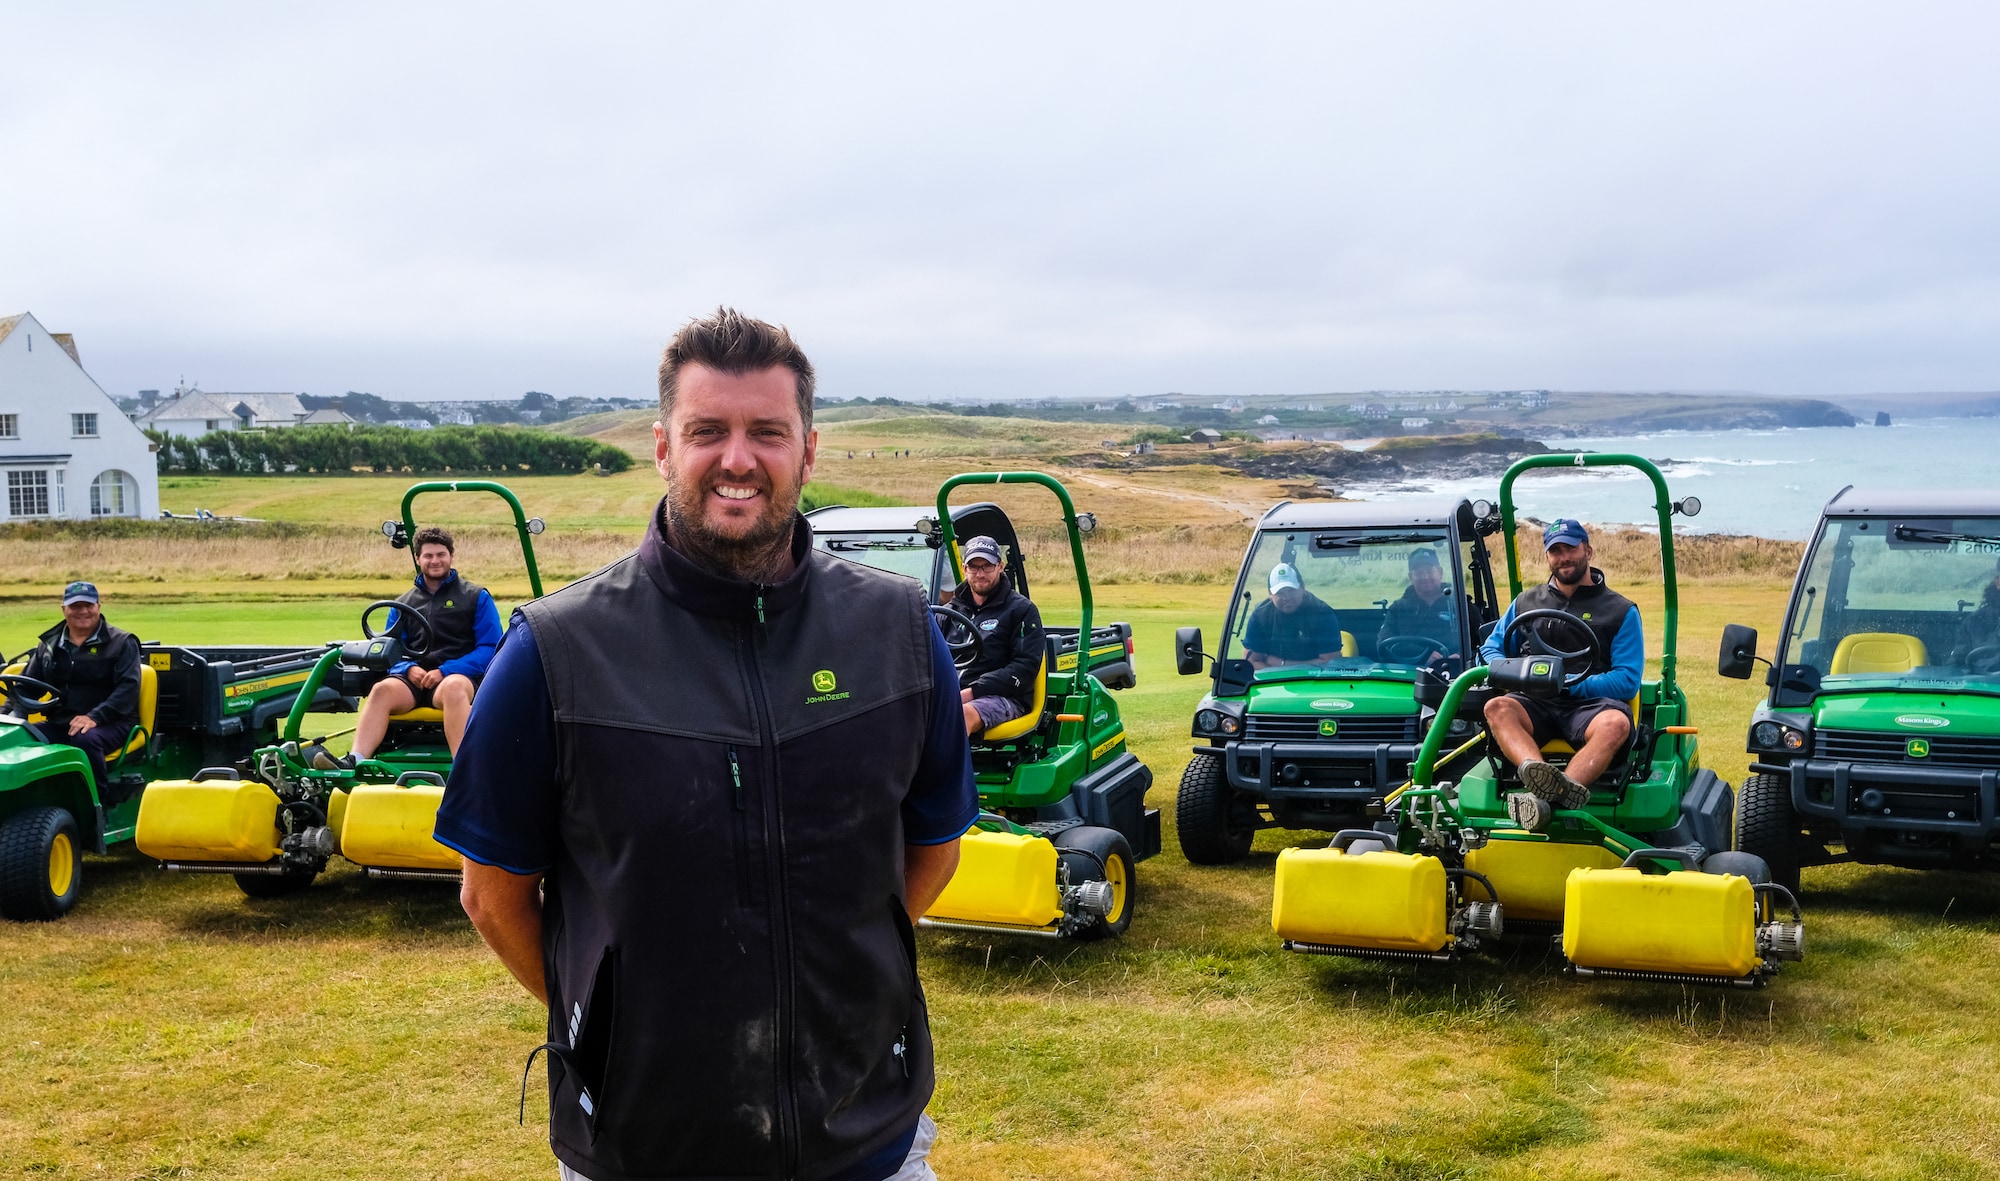 Trevose Golf Club Course Manager Neil Ivamy with his greenkeeping team and their new John Deere fleet 